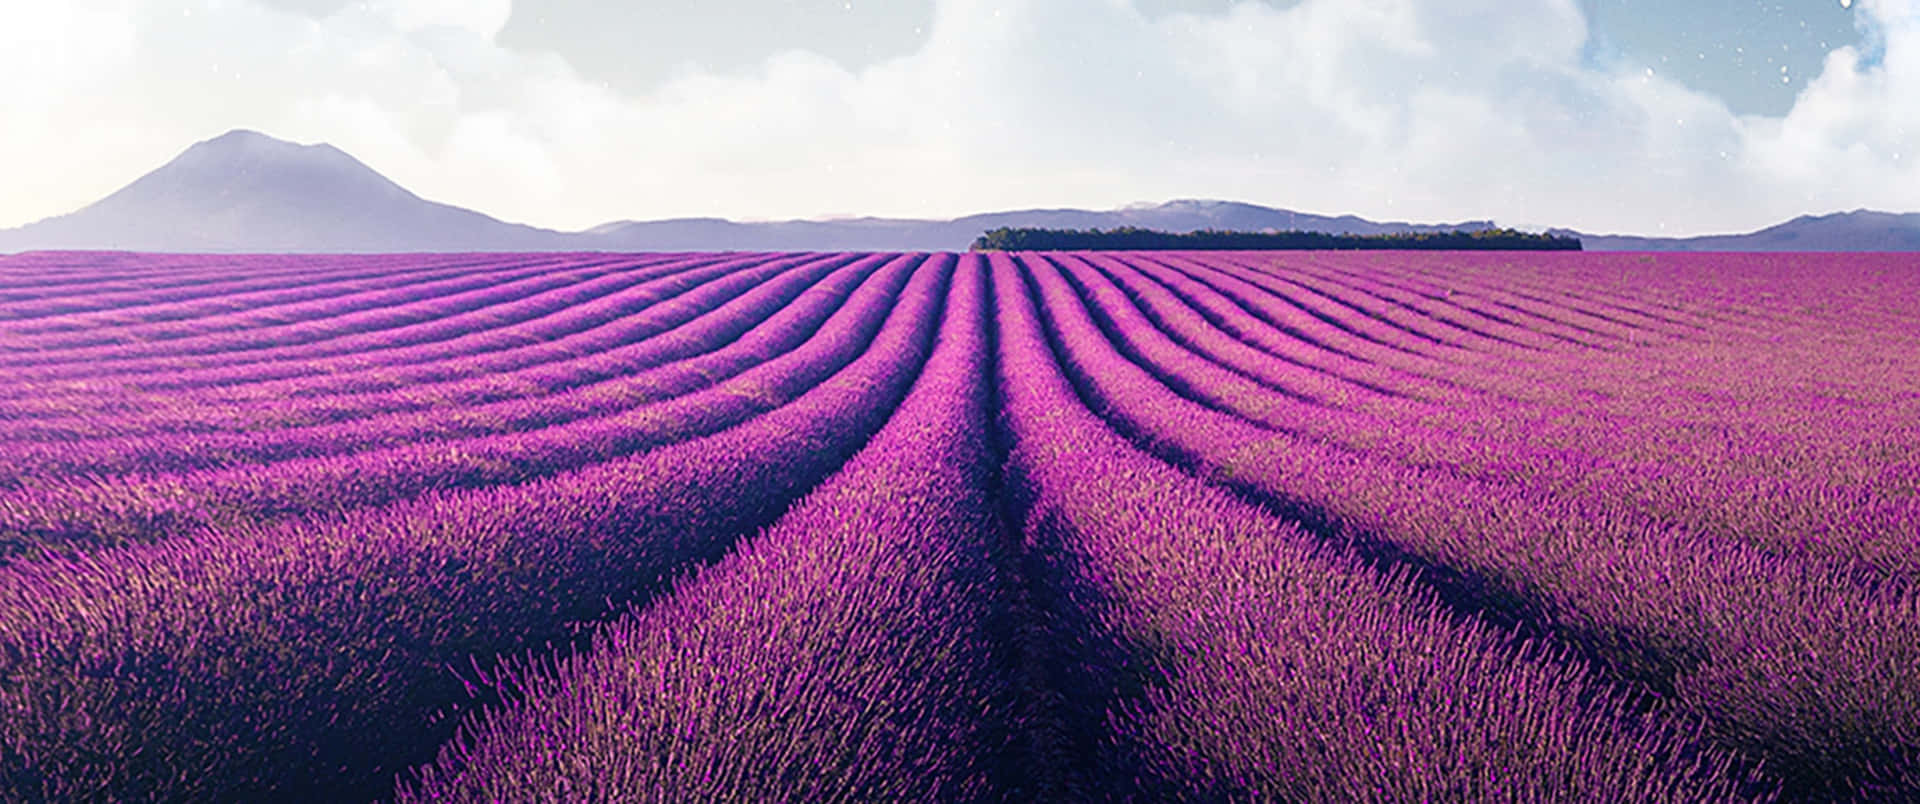 Enjoy the beauty of nature with a peaceful walk through Lavender Fields. Wallpaper